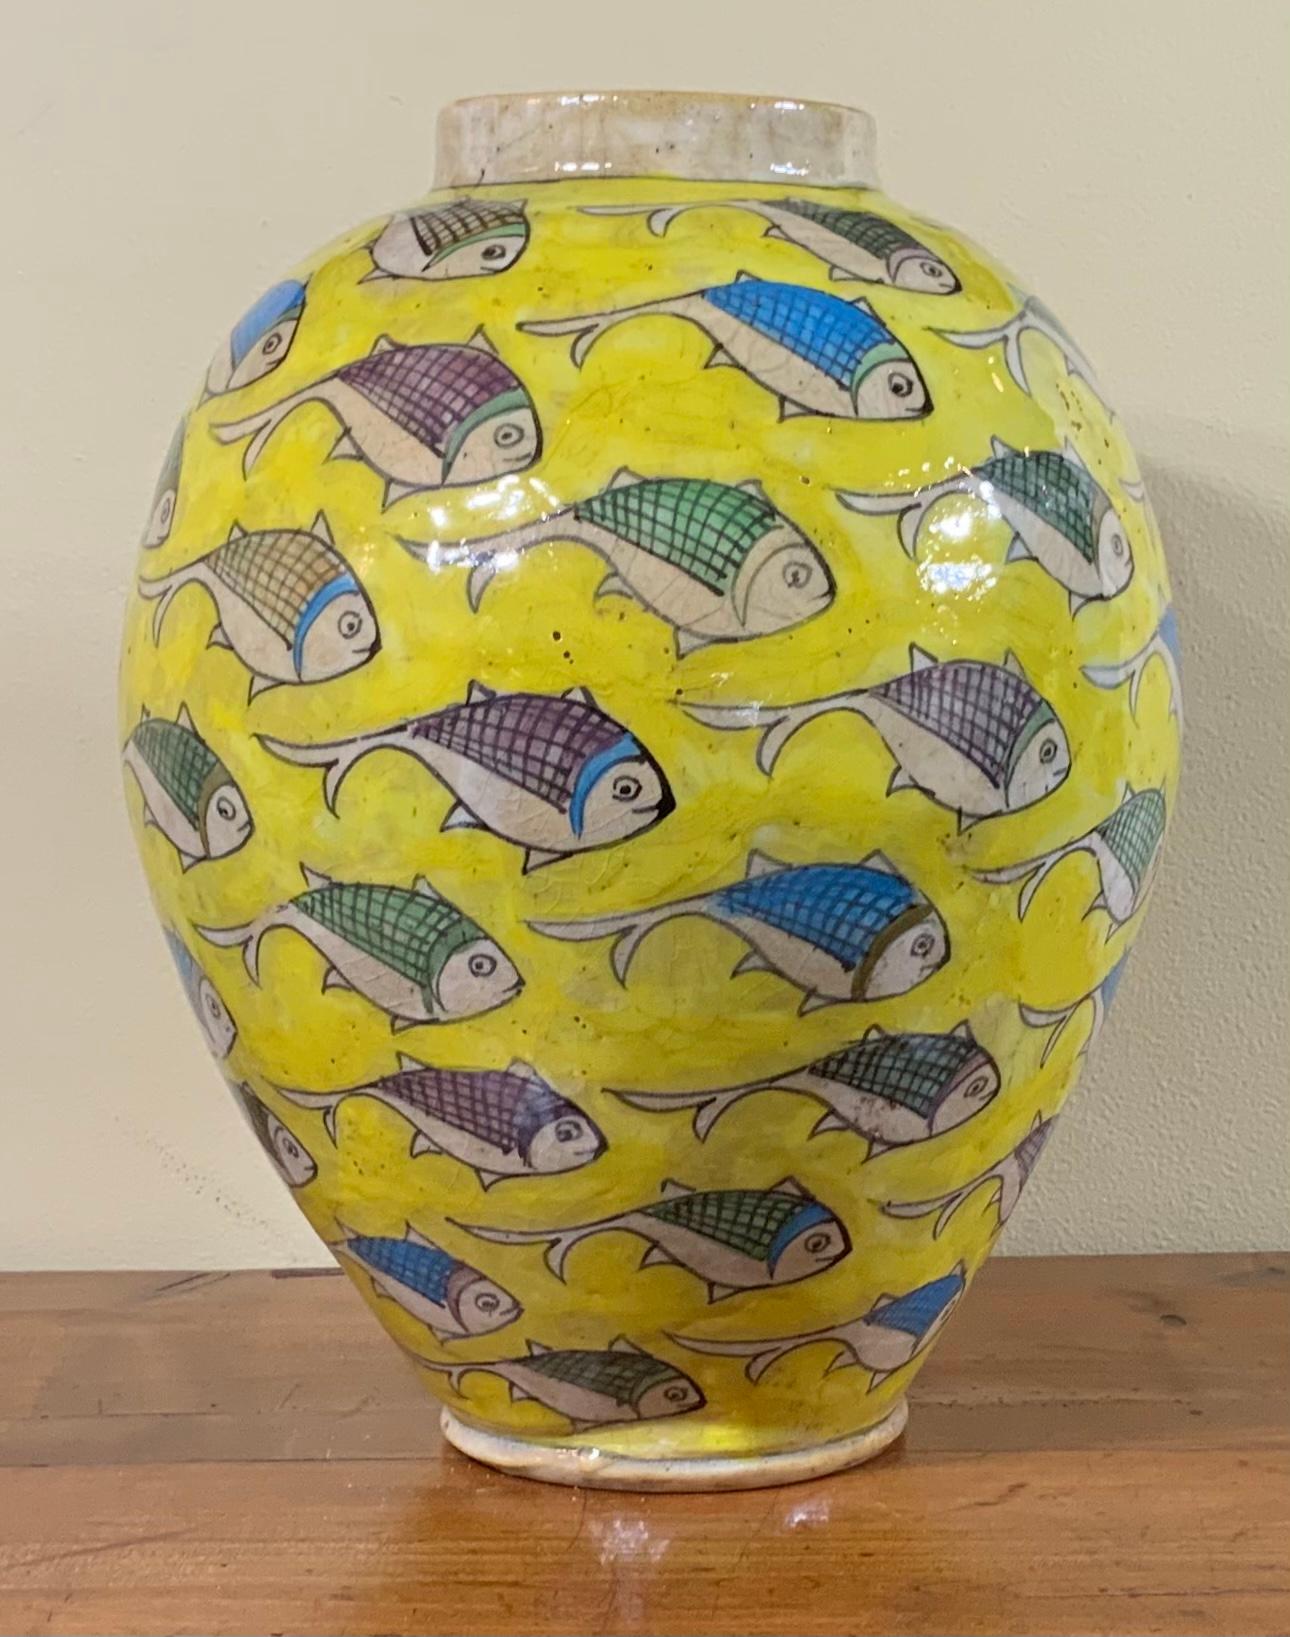 Beautiful yellow ceramic vase hand-painted and glazed with colorful fish motif surrounding on yellow background. Great object of art for display.